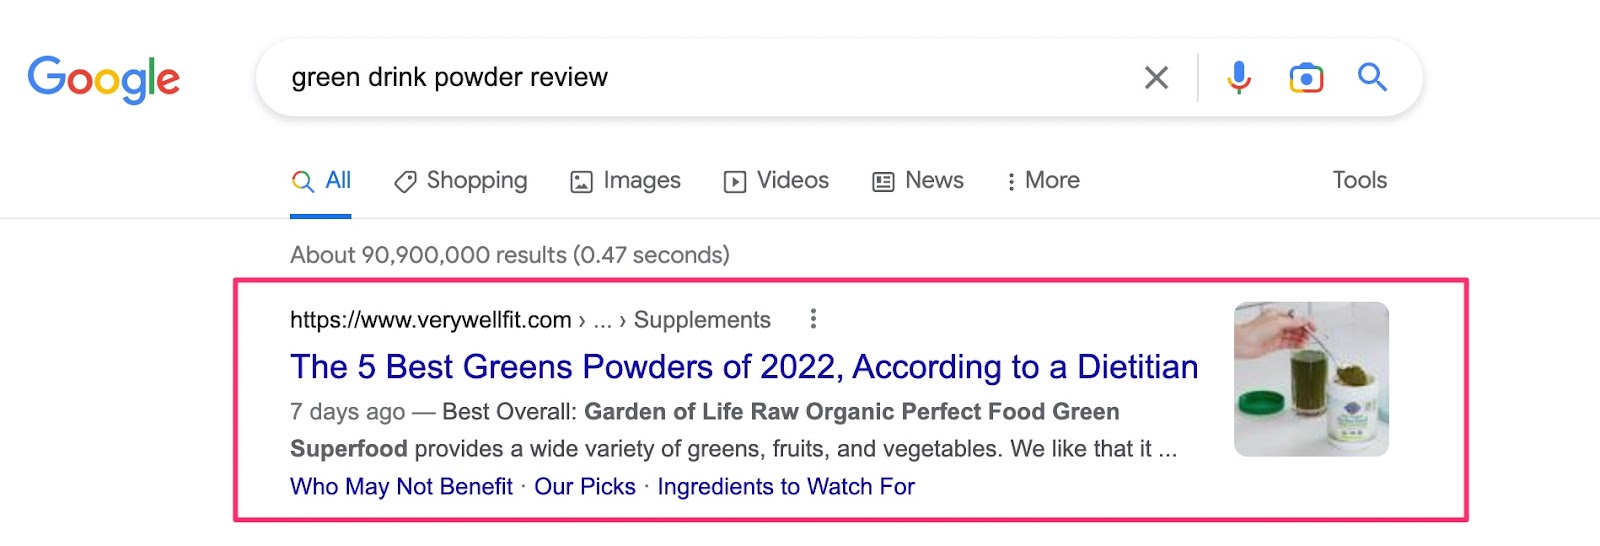 google search results for green drink powder review